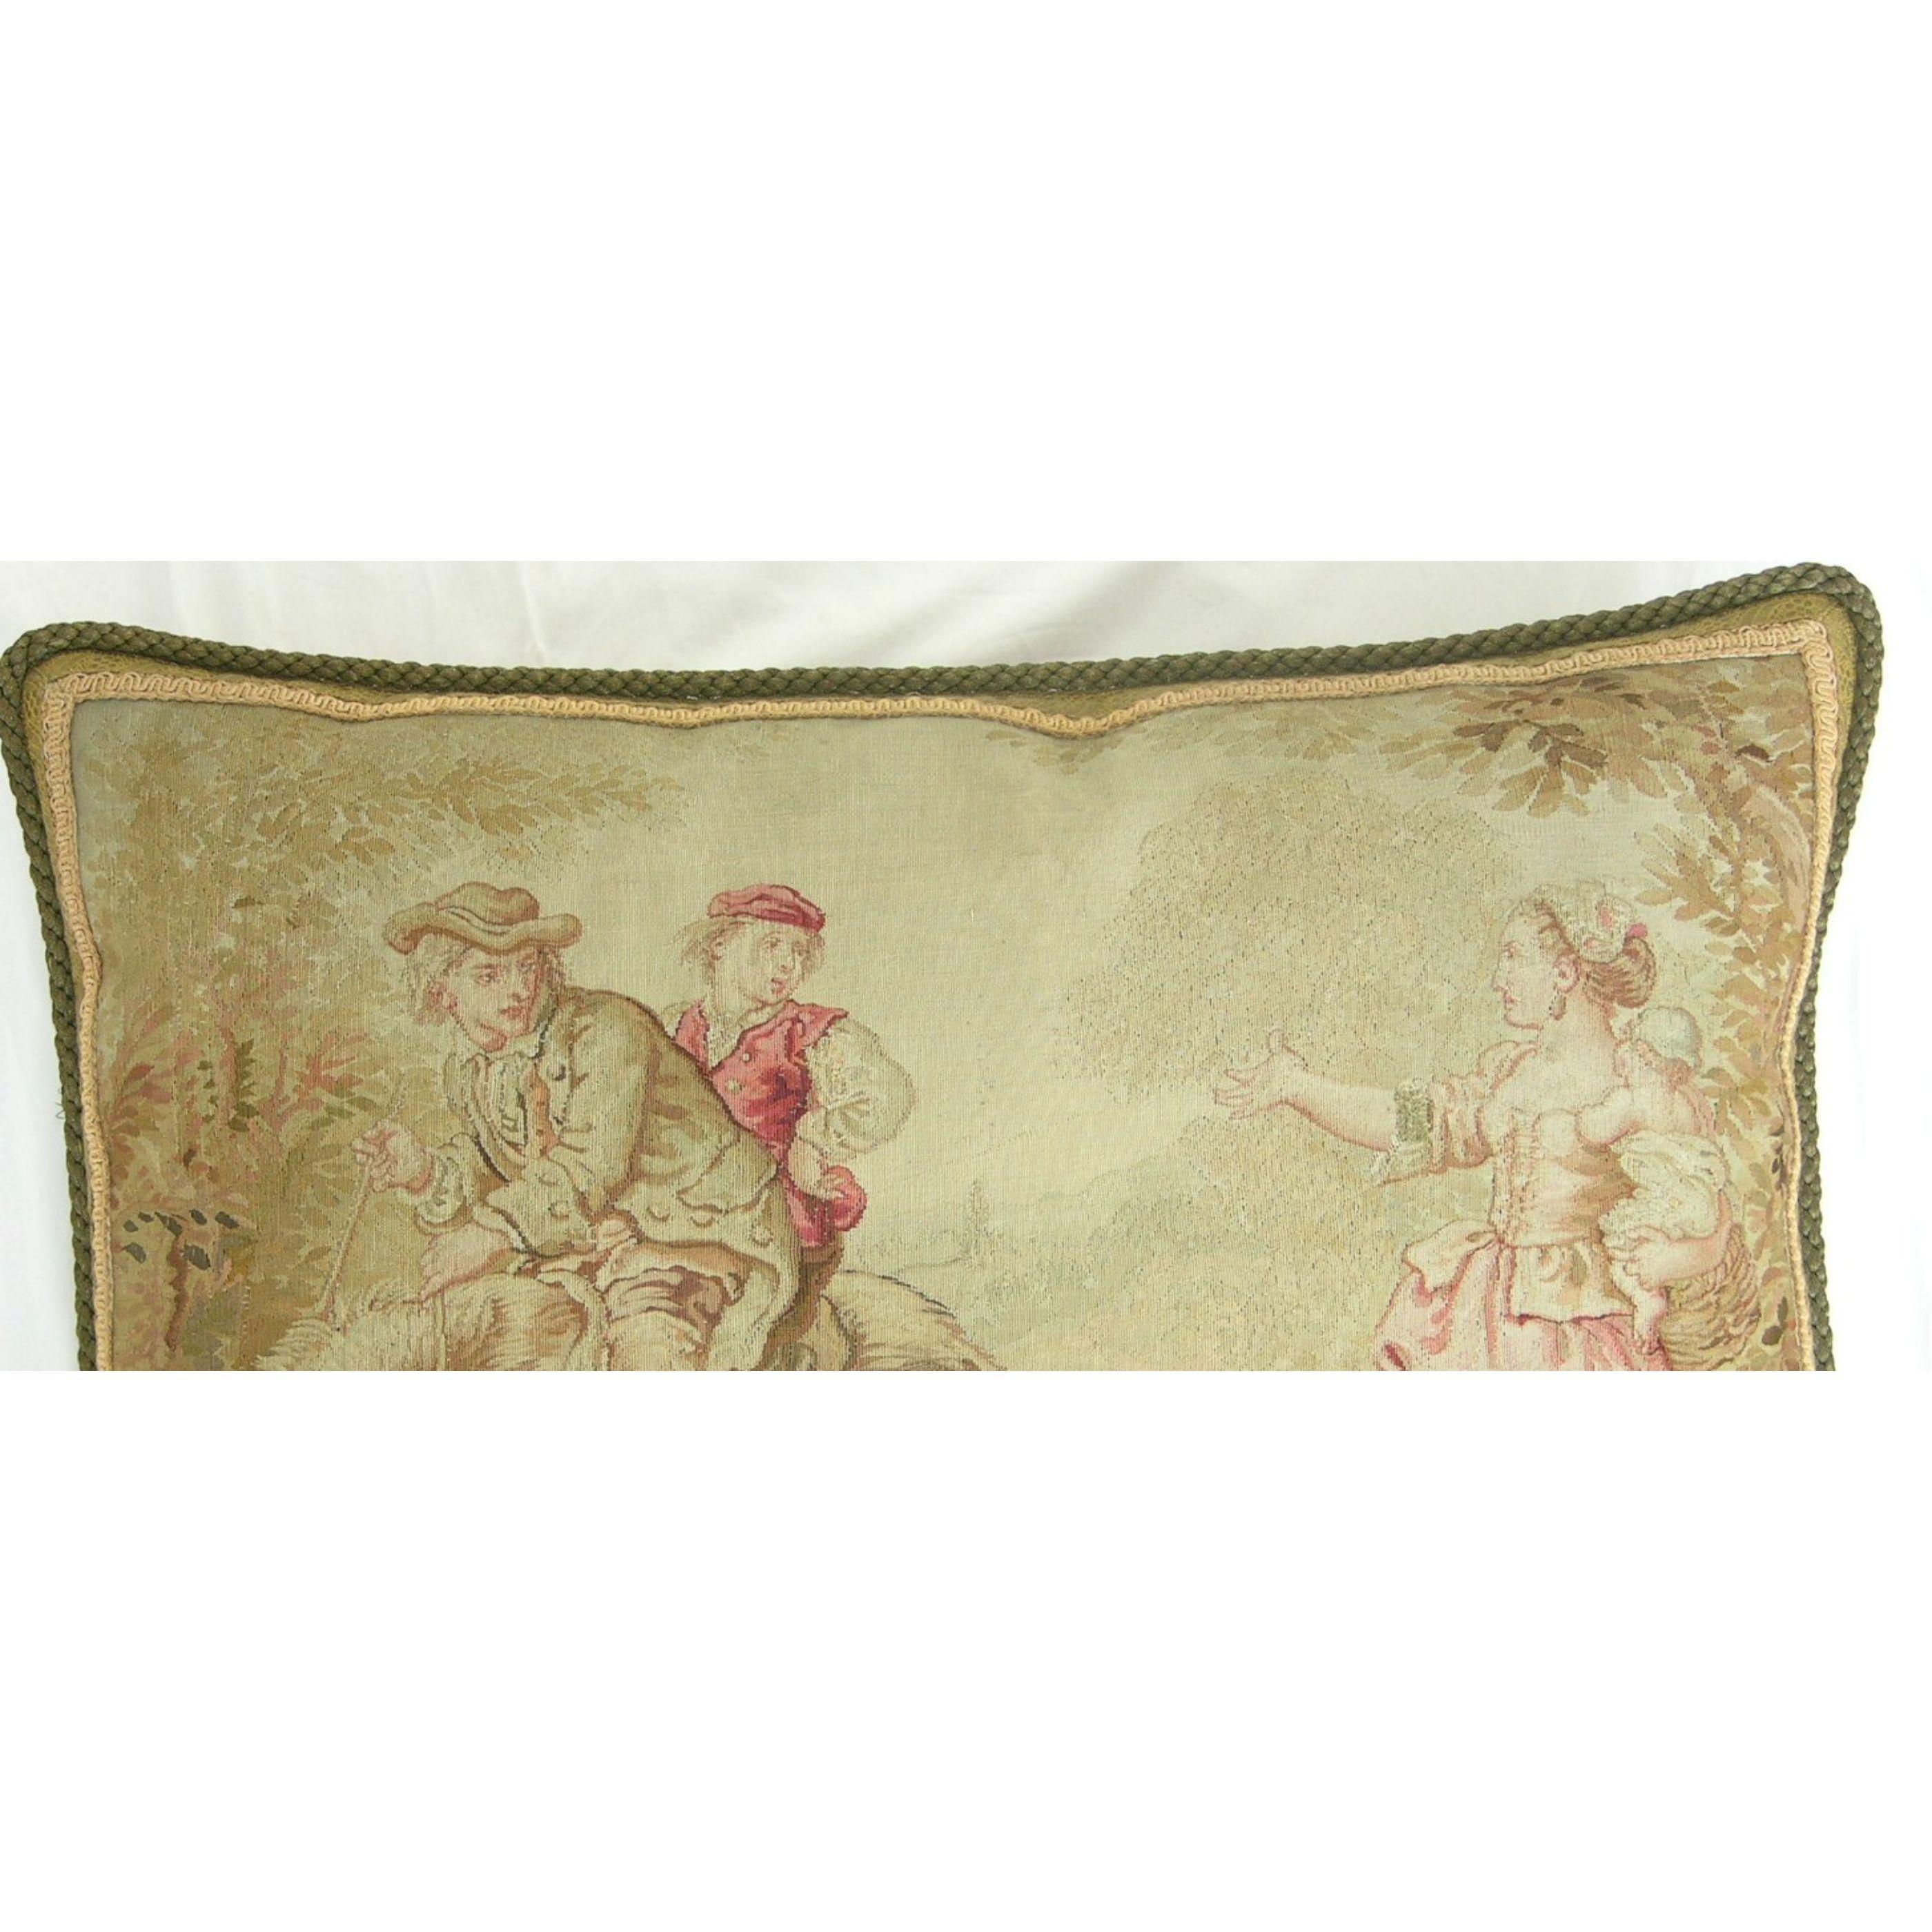 Ca. 1850 Antique French Aubusson Tapestry Pillow